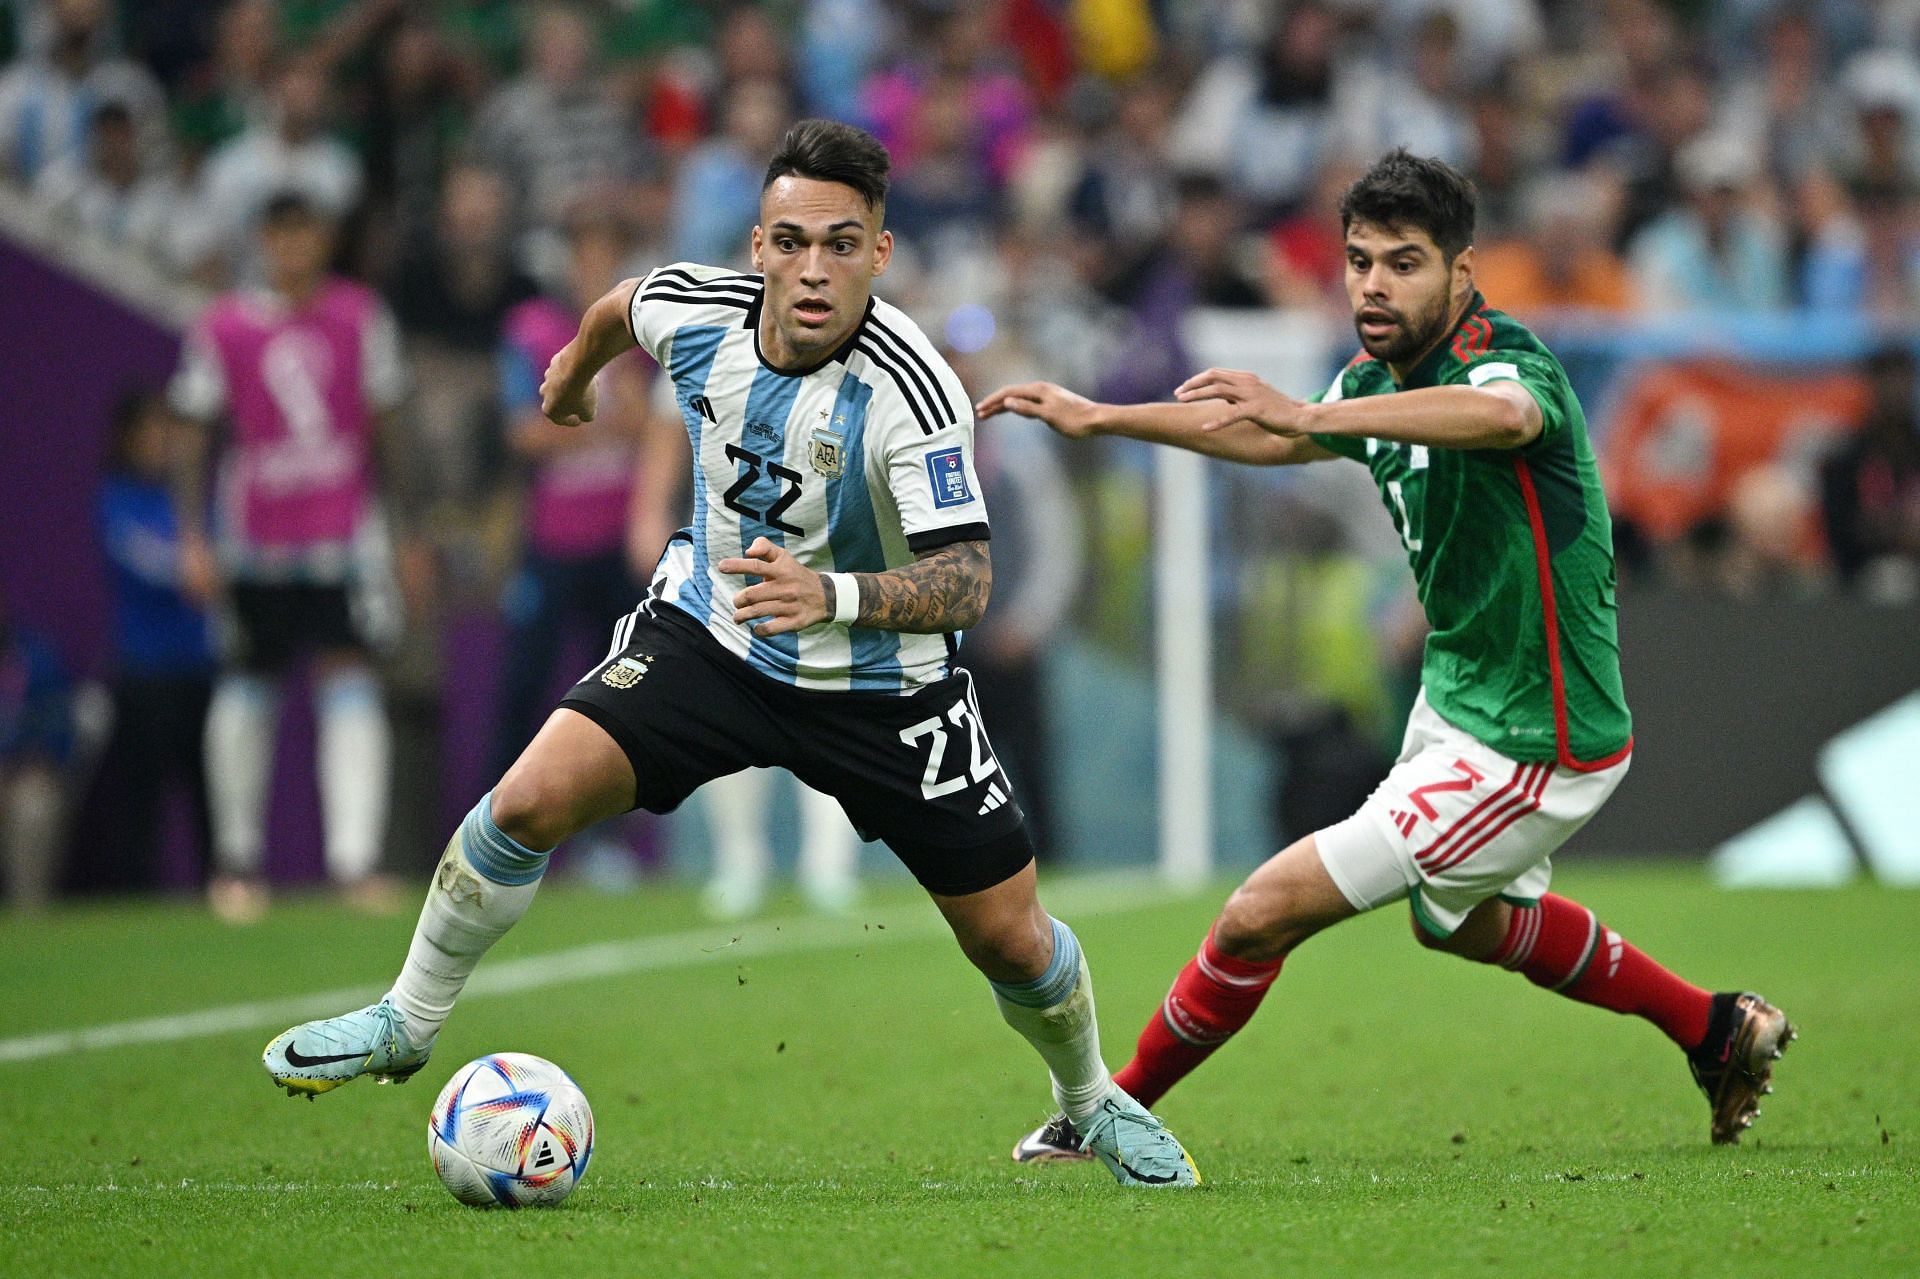 Argentina defender Lisandro Martinez kicked in the face by Mexico's Hirving  Lozano in heated World Cup match